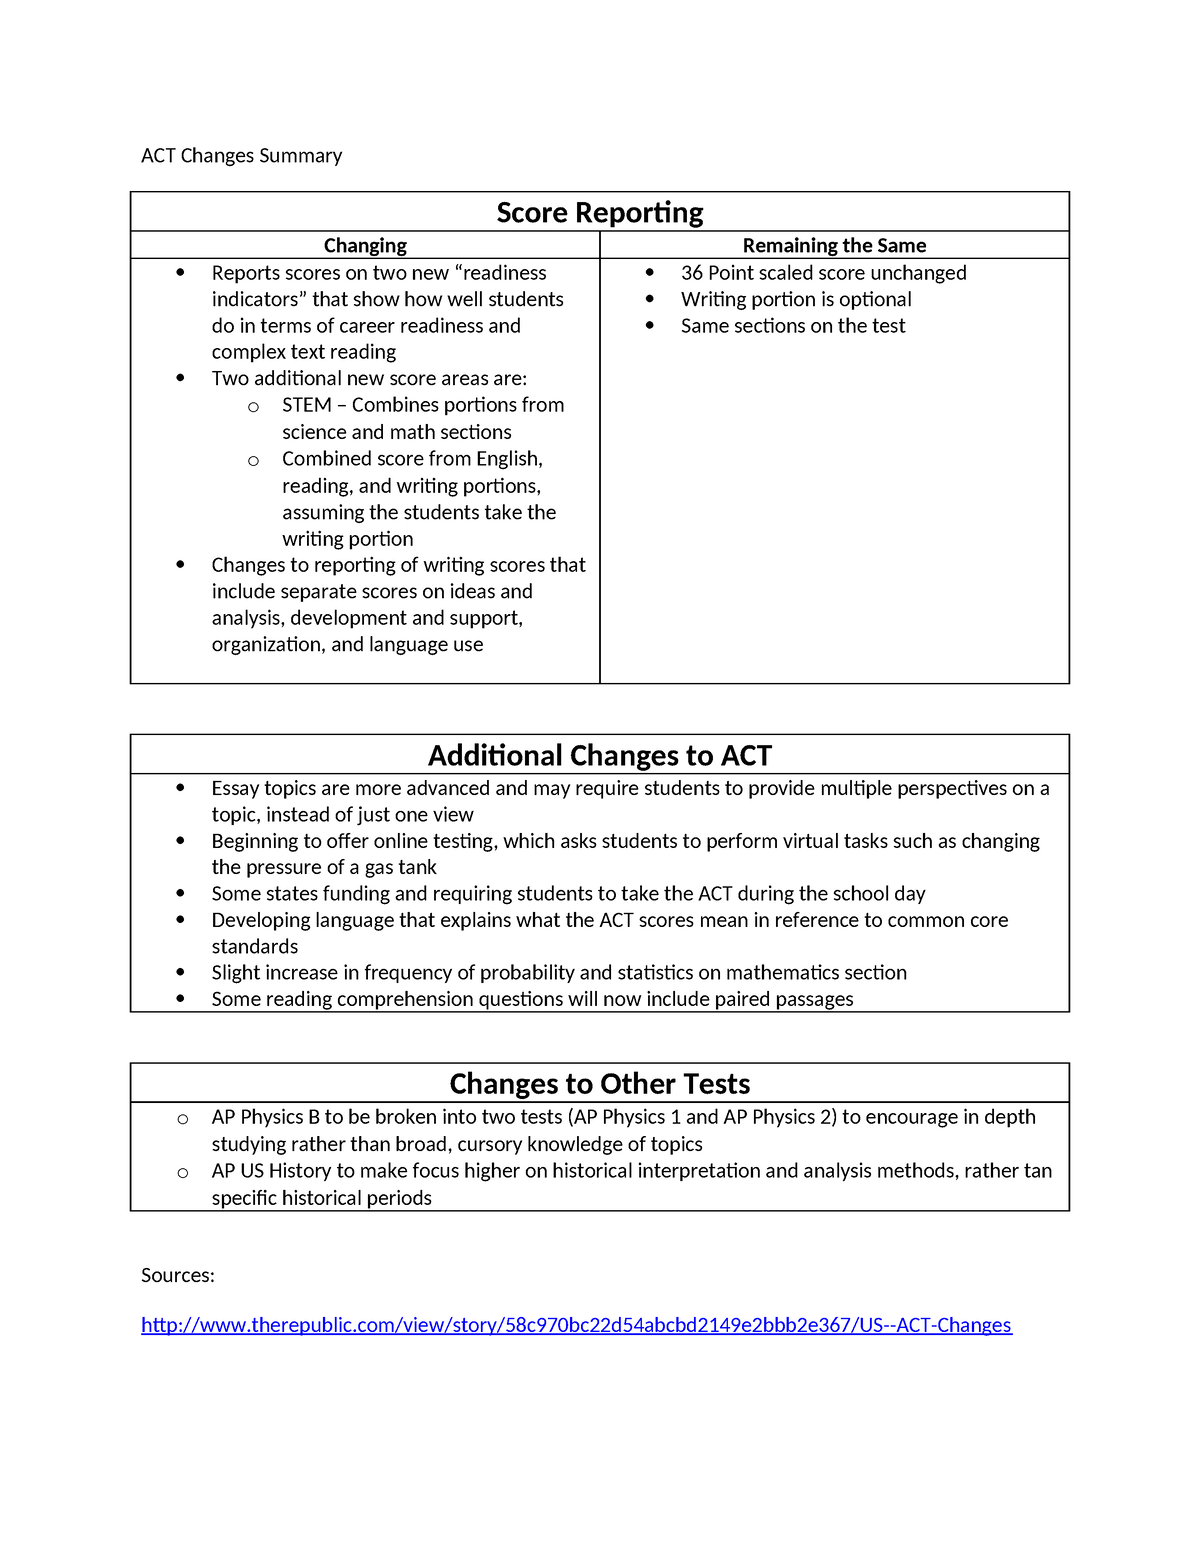 ACT Changes Summary Prep for basic standardized test ACT Changes